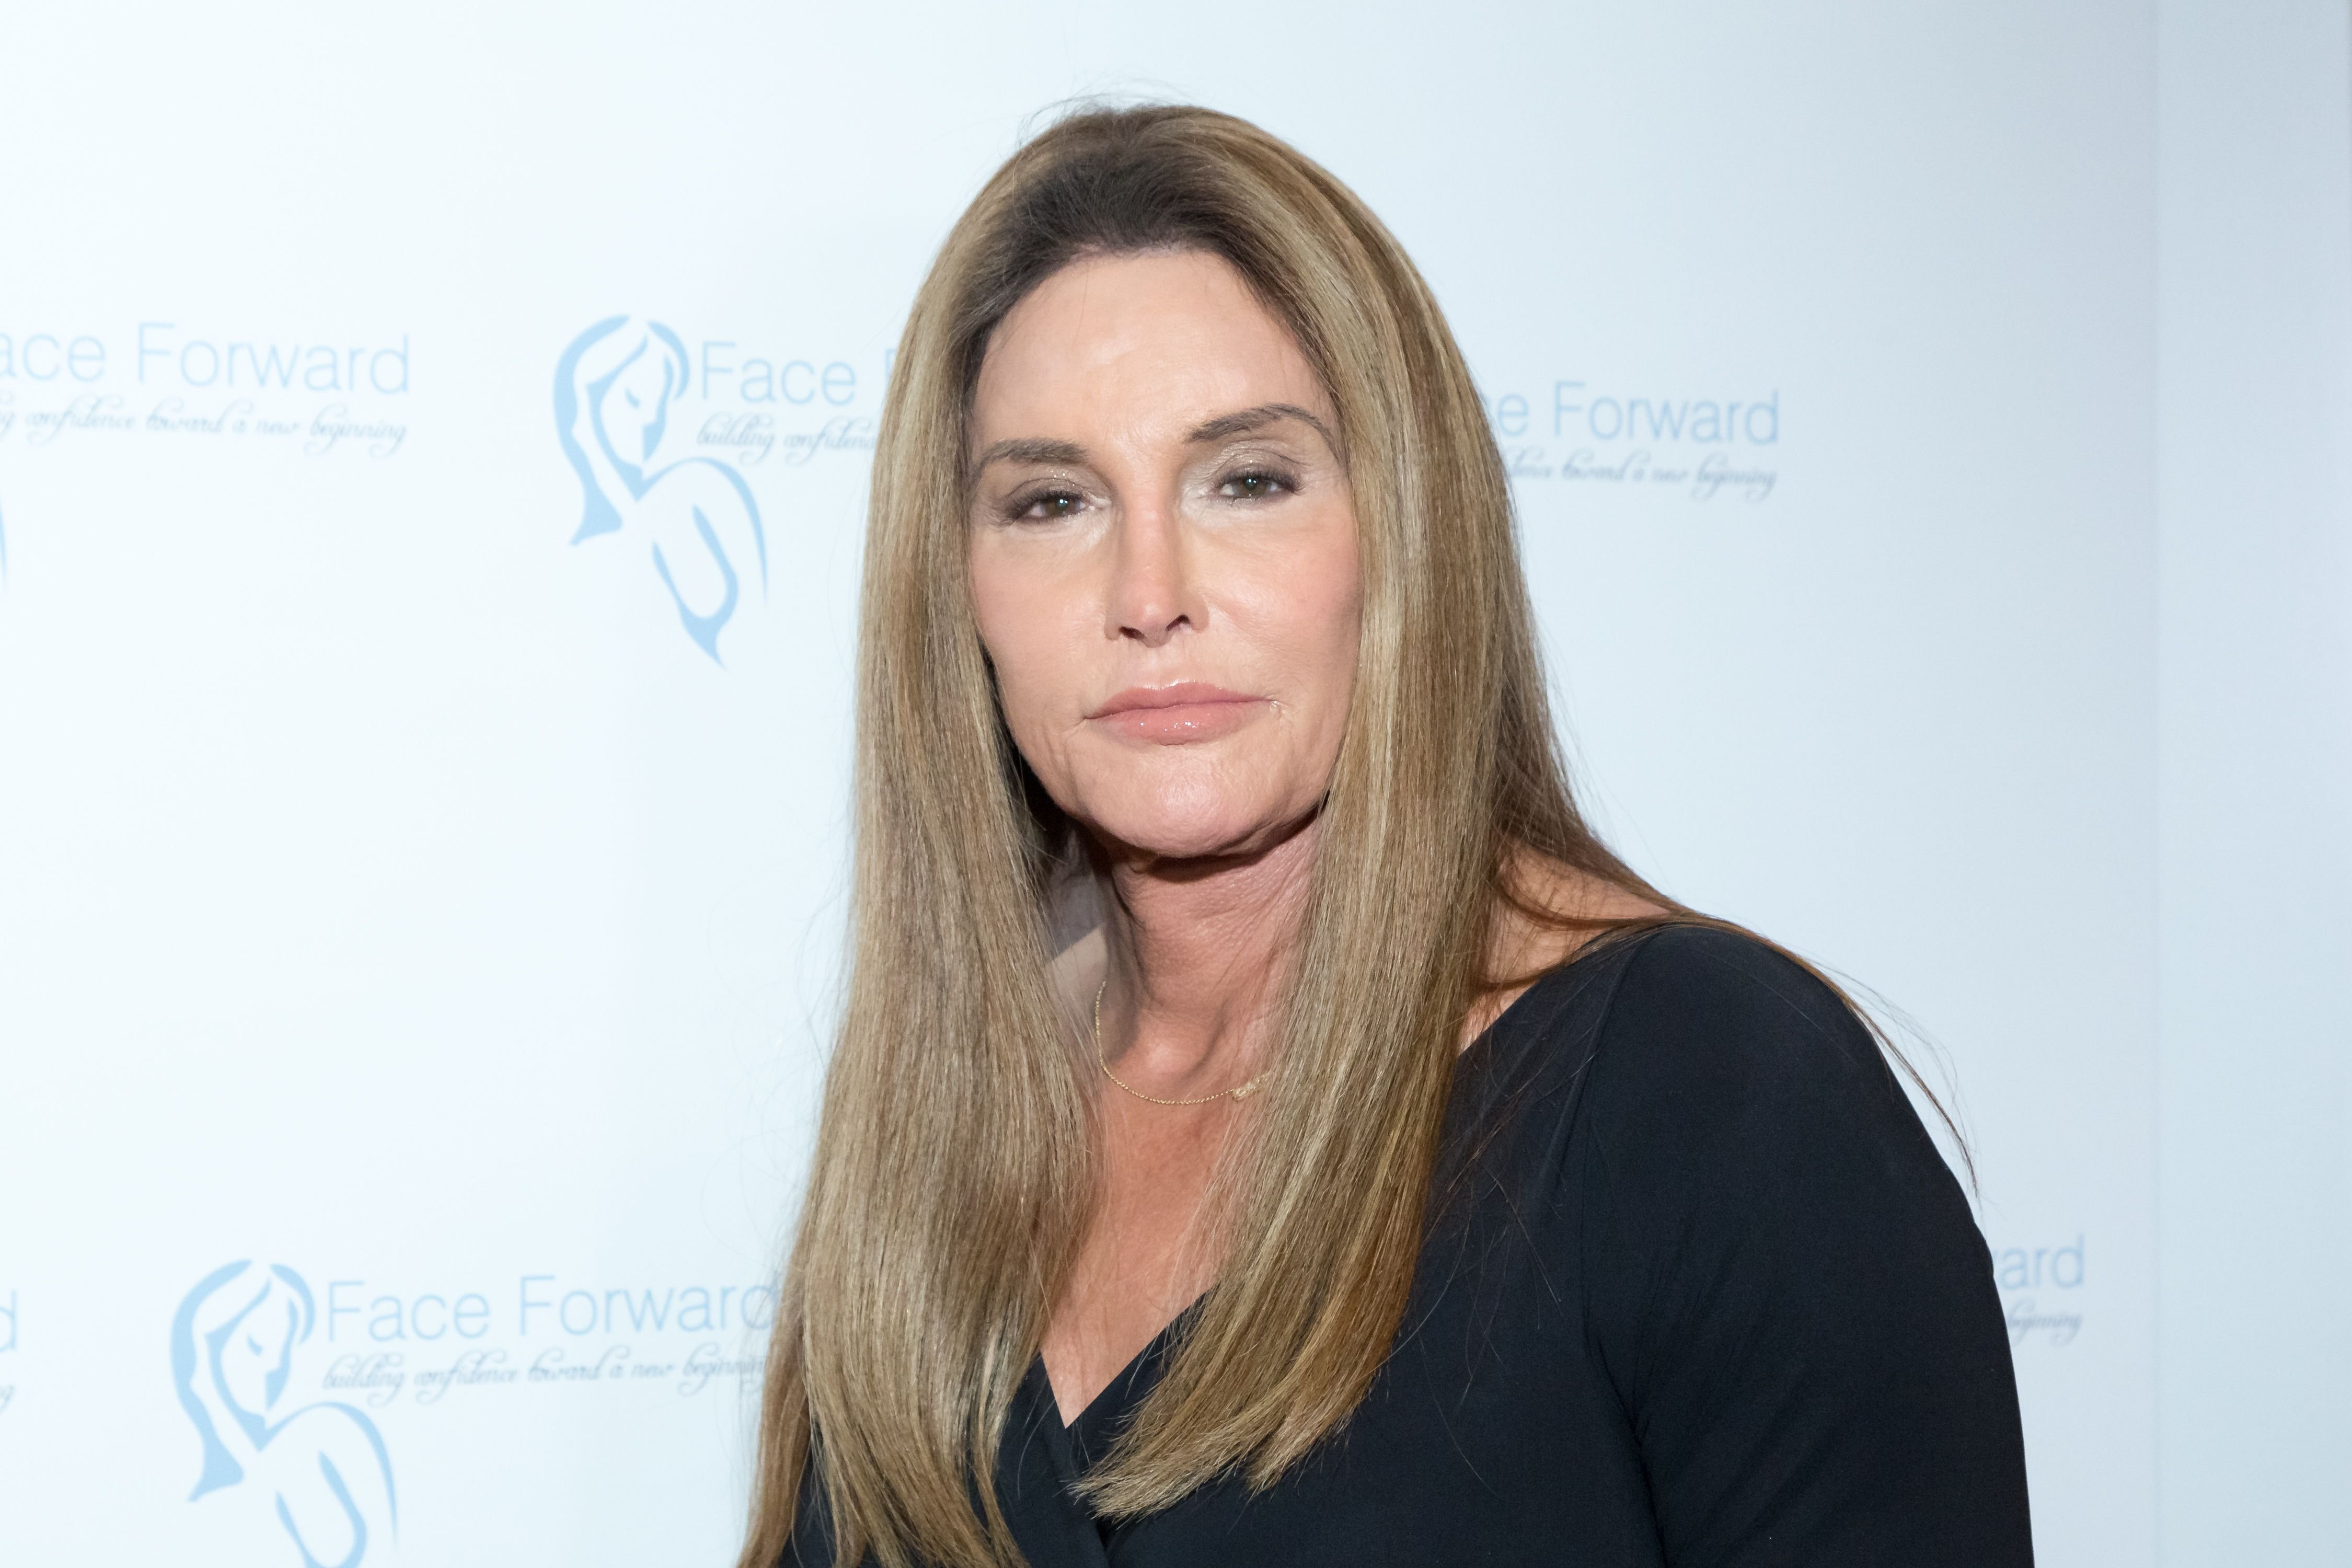 TV Personality Caitlyn Jenner at the Face Forward's 10th Annual "La Dolce Vita" Themed Gala at the Beverly Wilshire Four Seasons Hotel on September 22, 2018 | Photo: Getty Images